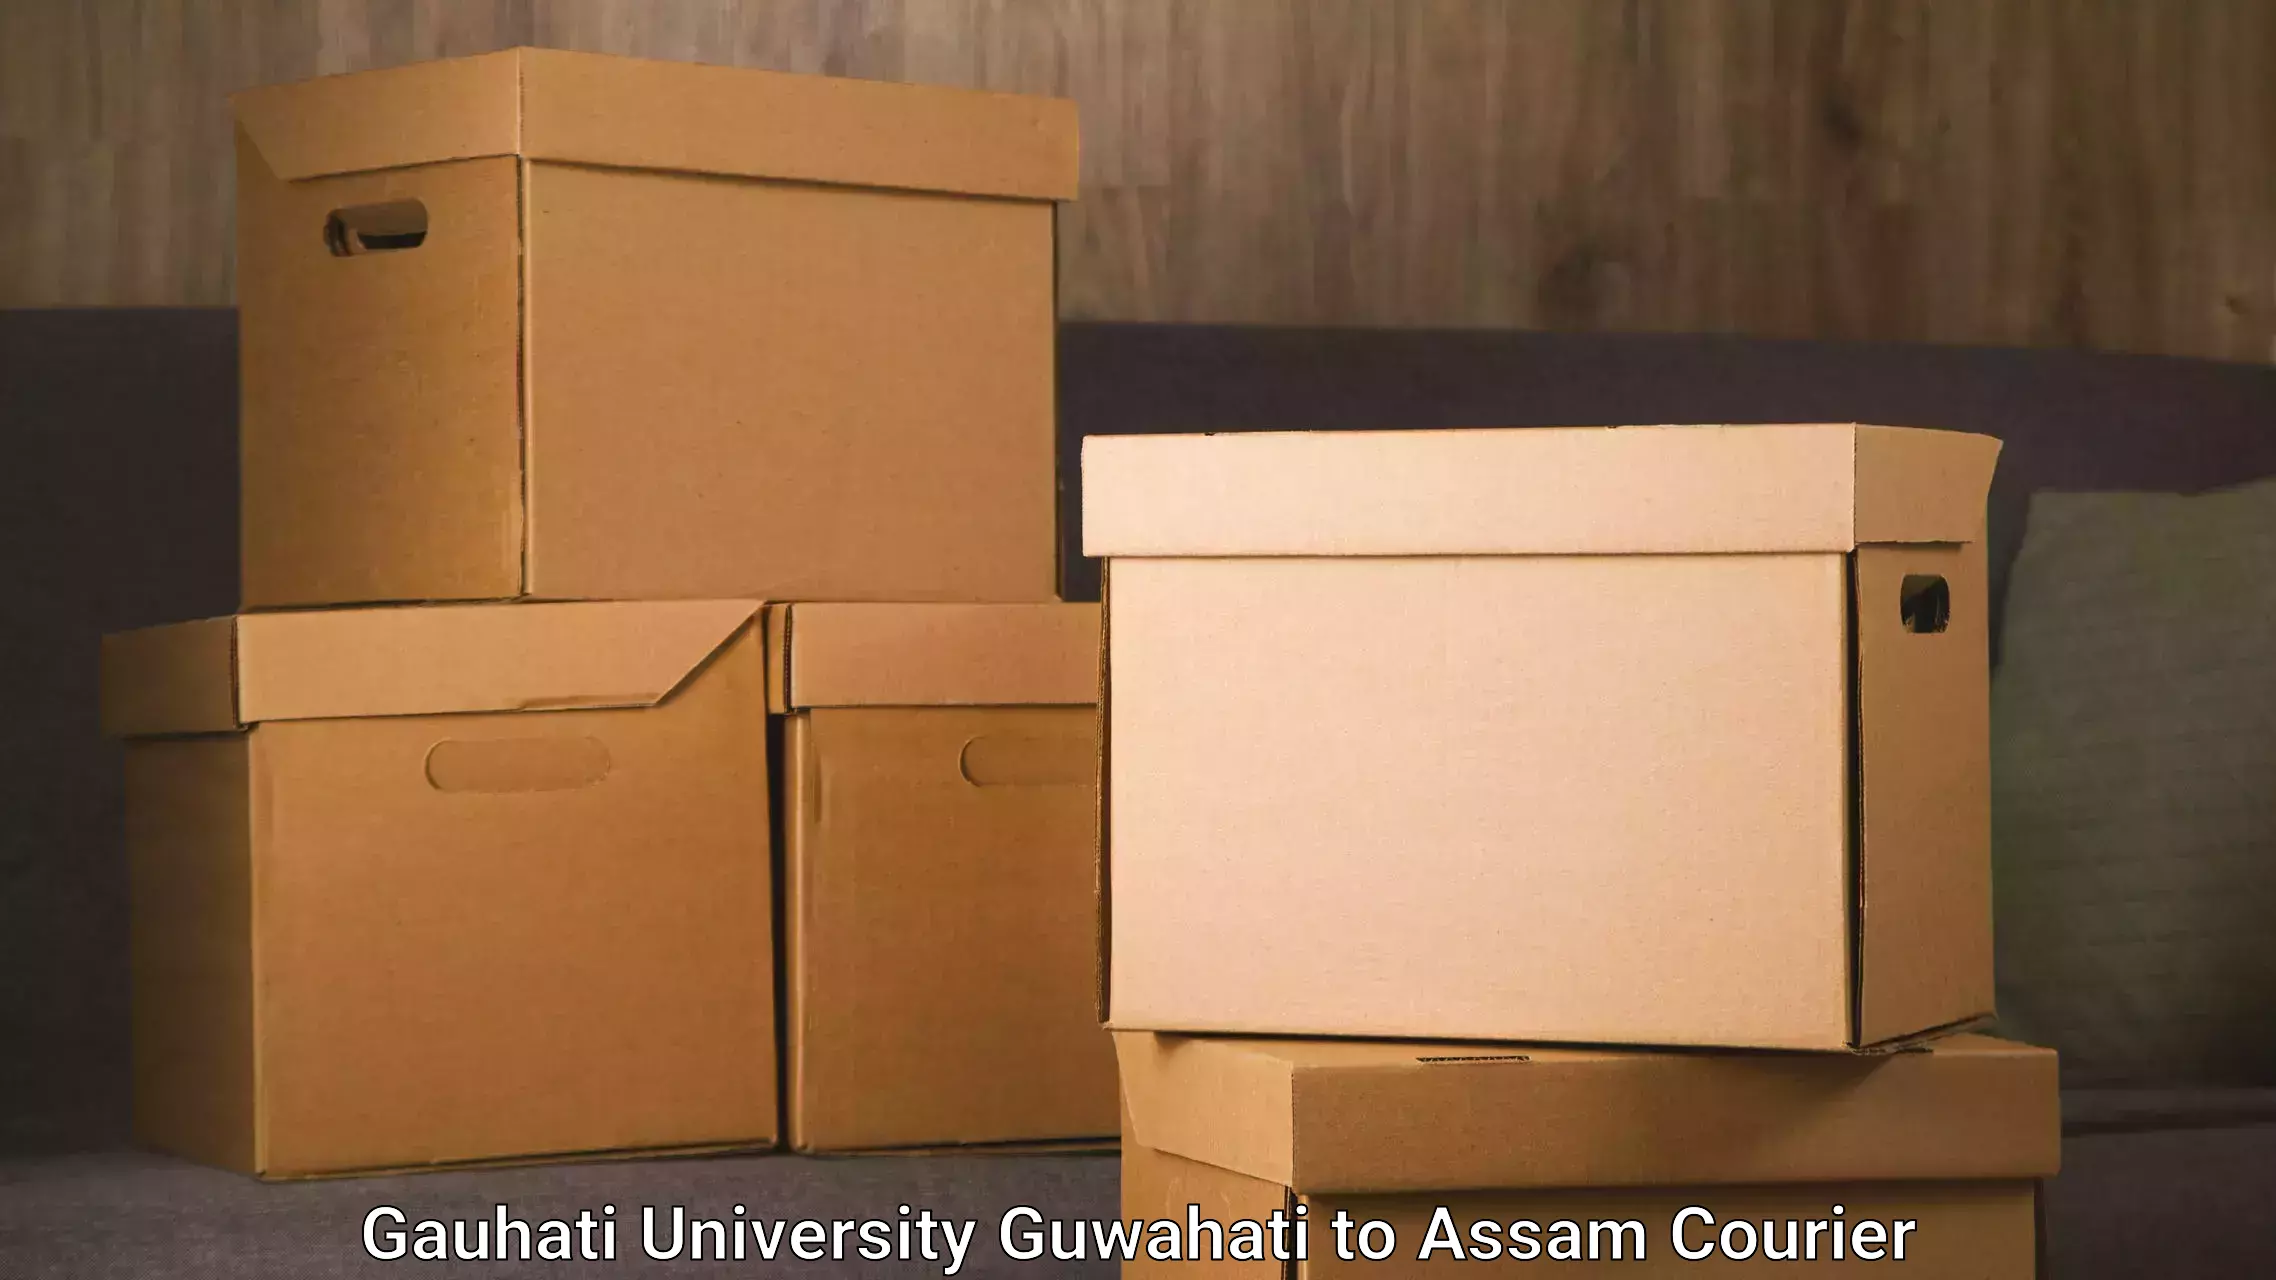 Reliable courier service Gauhati University Guwahati to Silchar